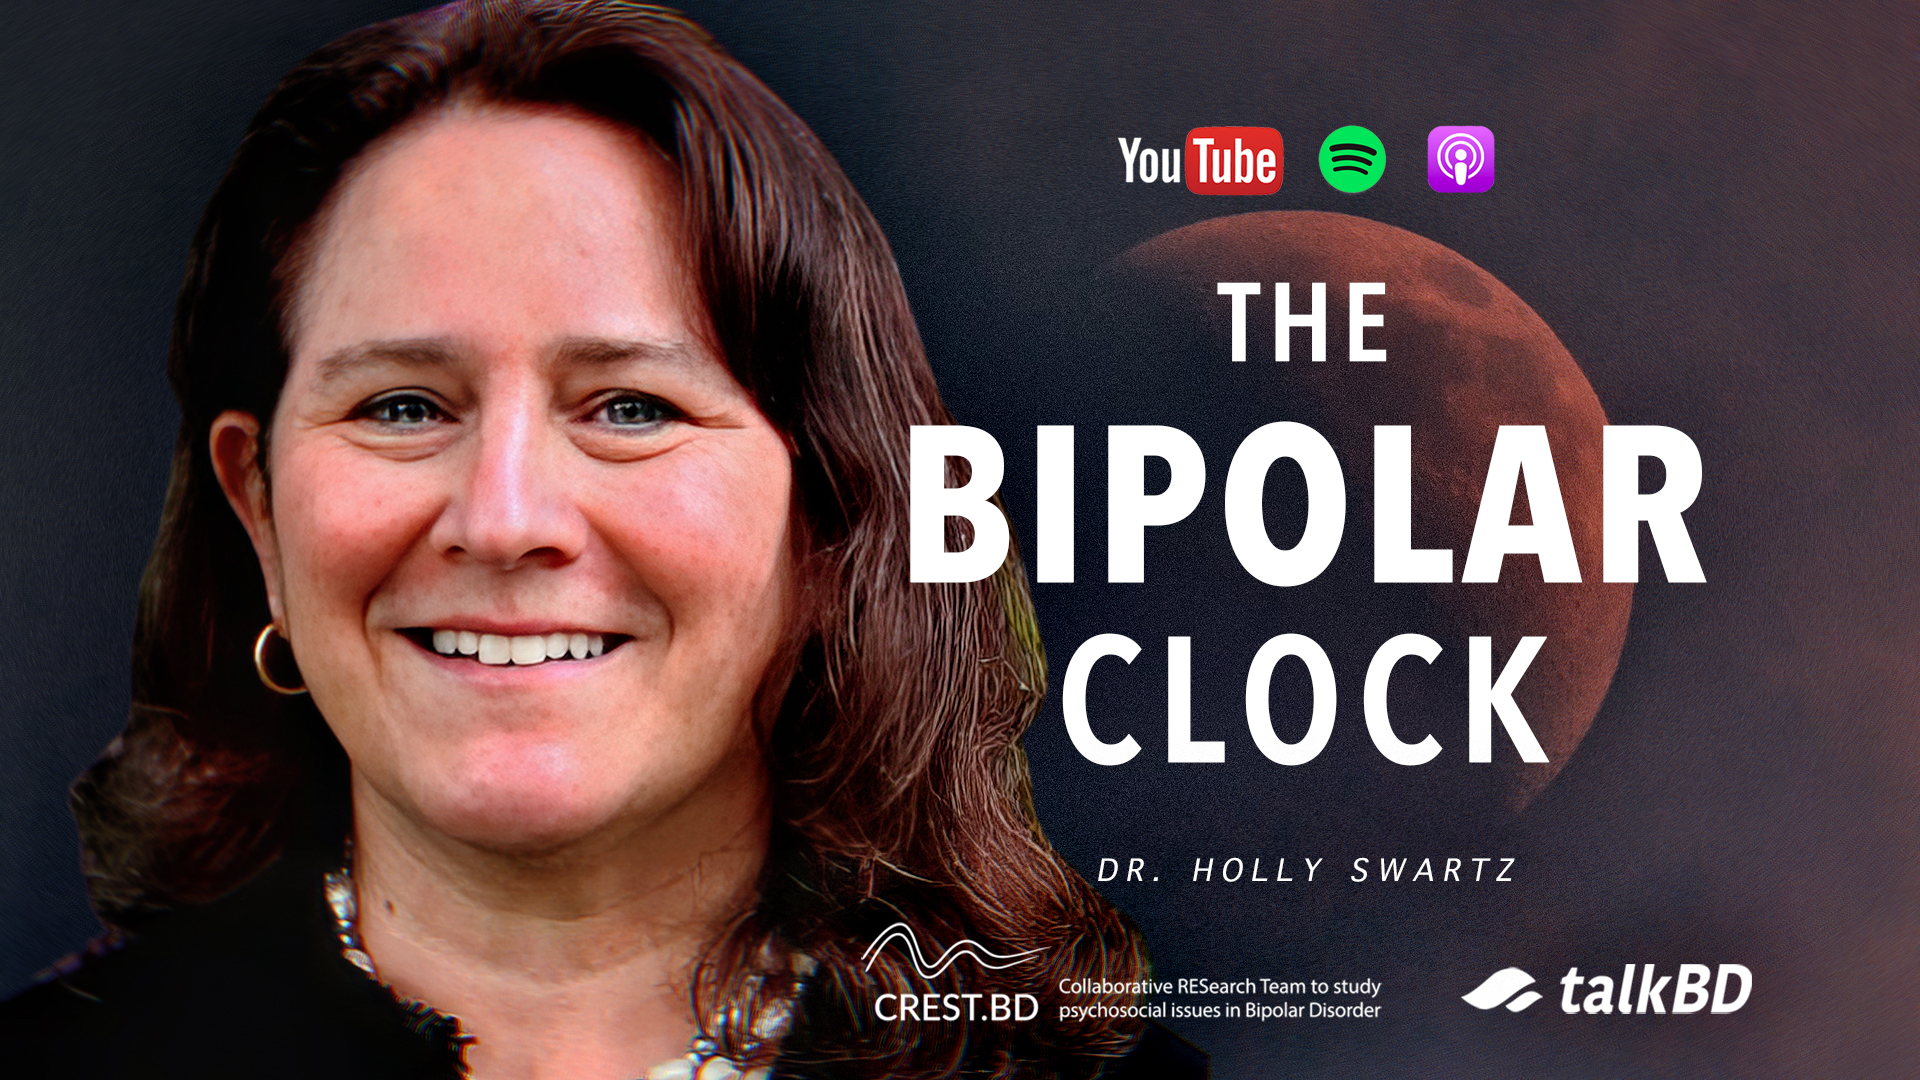 The Bipolar Clock: Stabilize Mood by Resetting Your Body Clock | Dr. Holly Swartz | #talkBD EP 40 🌓